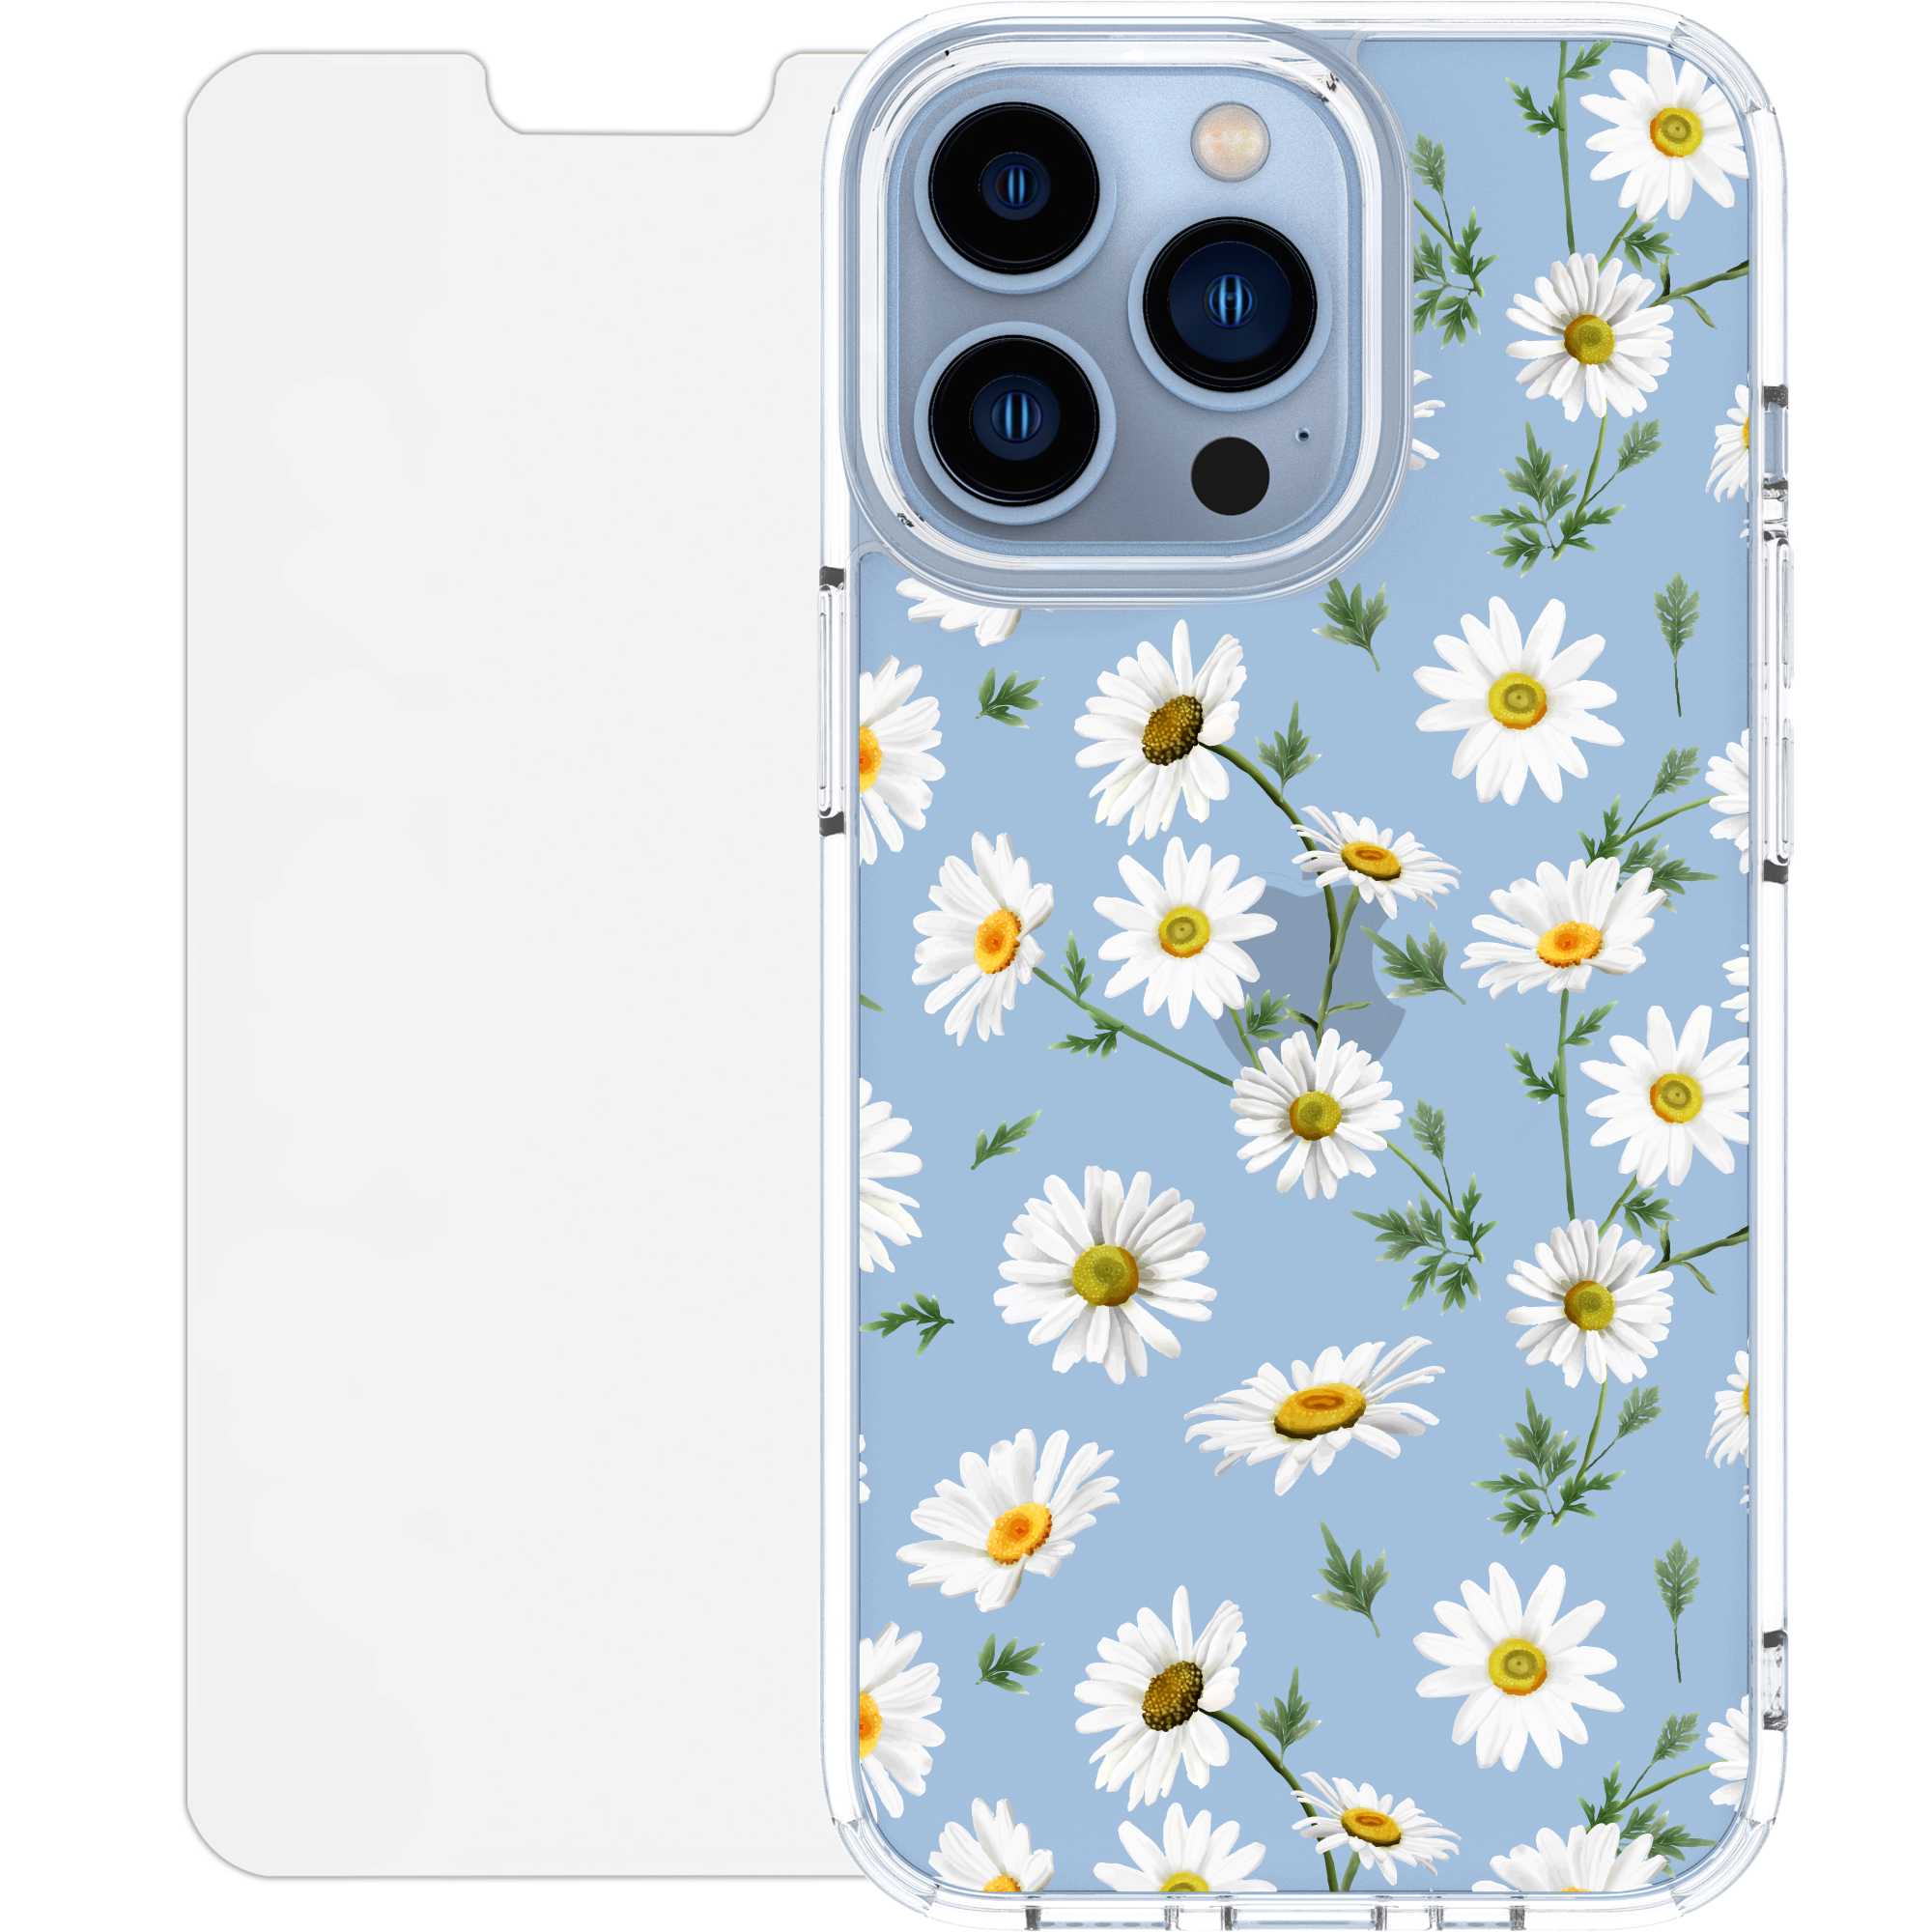 Scooch CrystalCase for iPhone 13 Pro Daisies Scooch CrystalCase